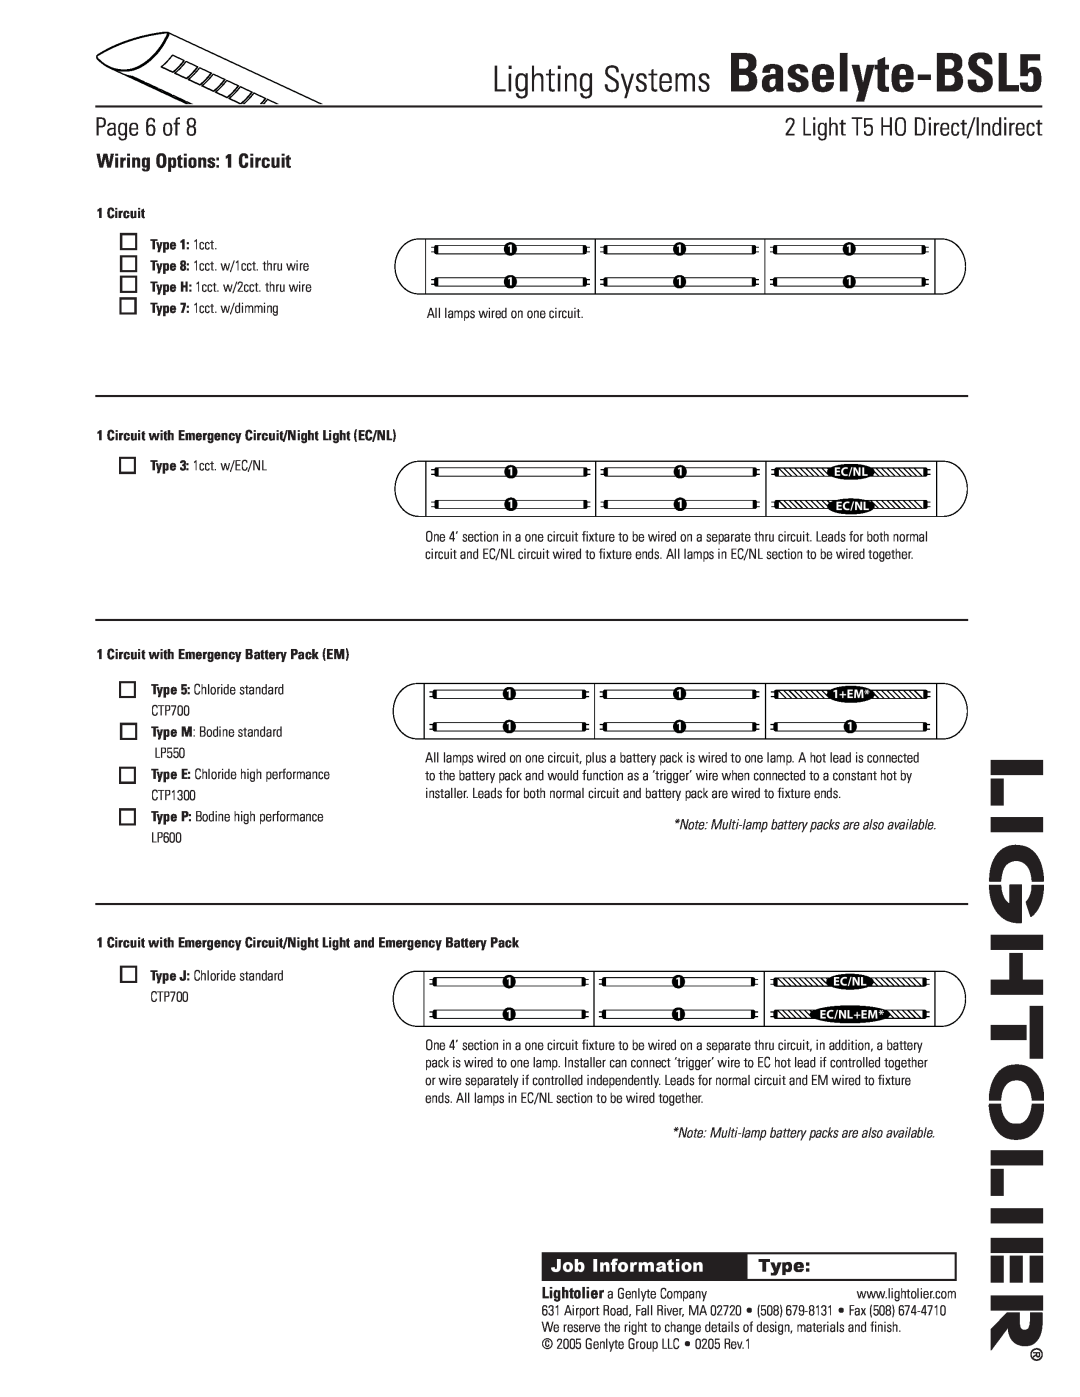 Lightolier Baselyte-BSL5 Wiring Options 1 Circuit, Circuit Type 1 1cct, Circuit with Emergency Battery Pack EM, Page of 